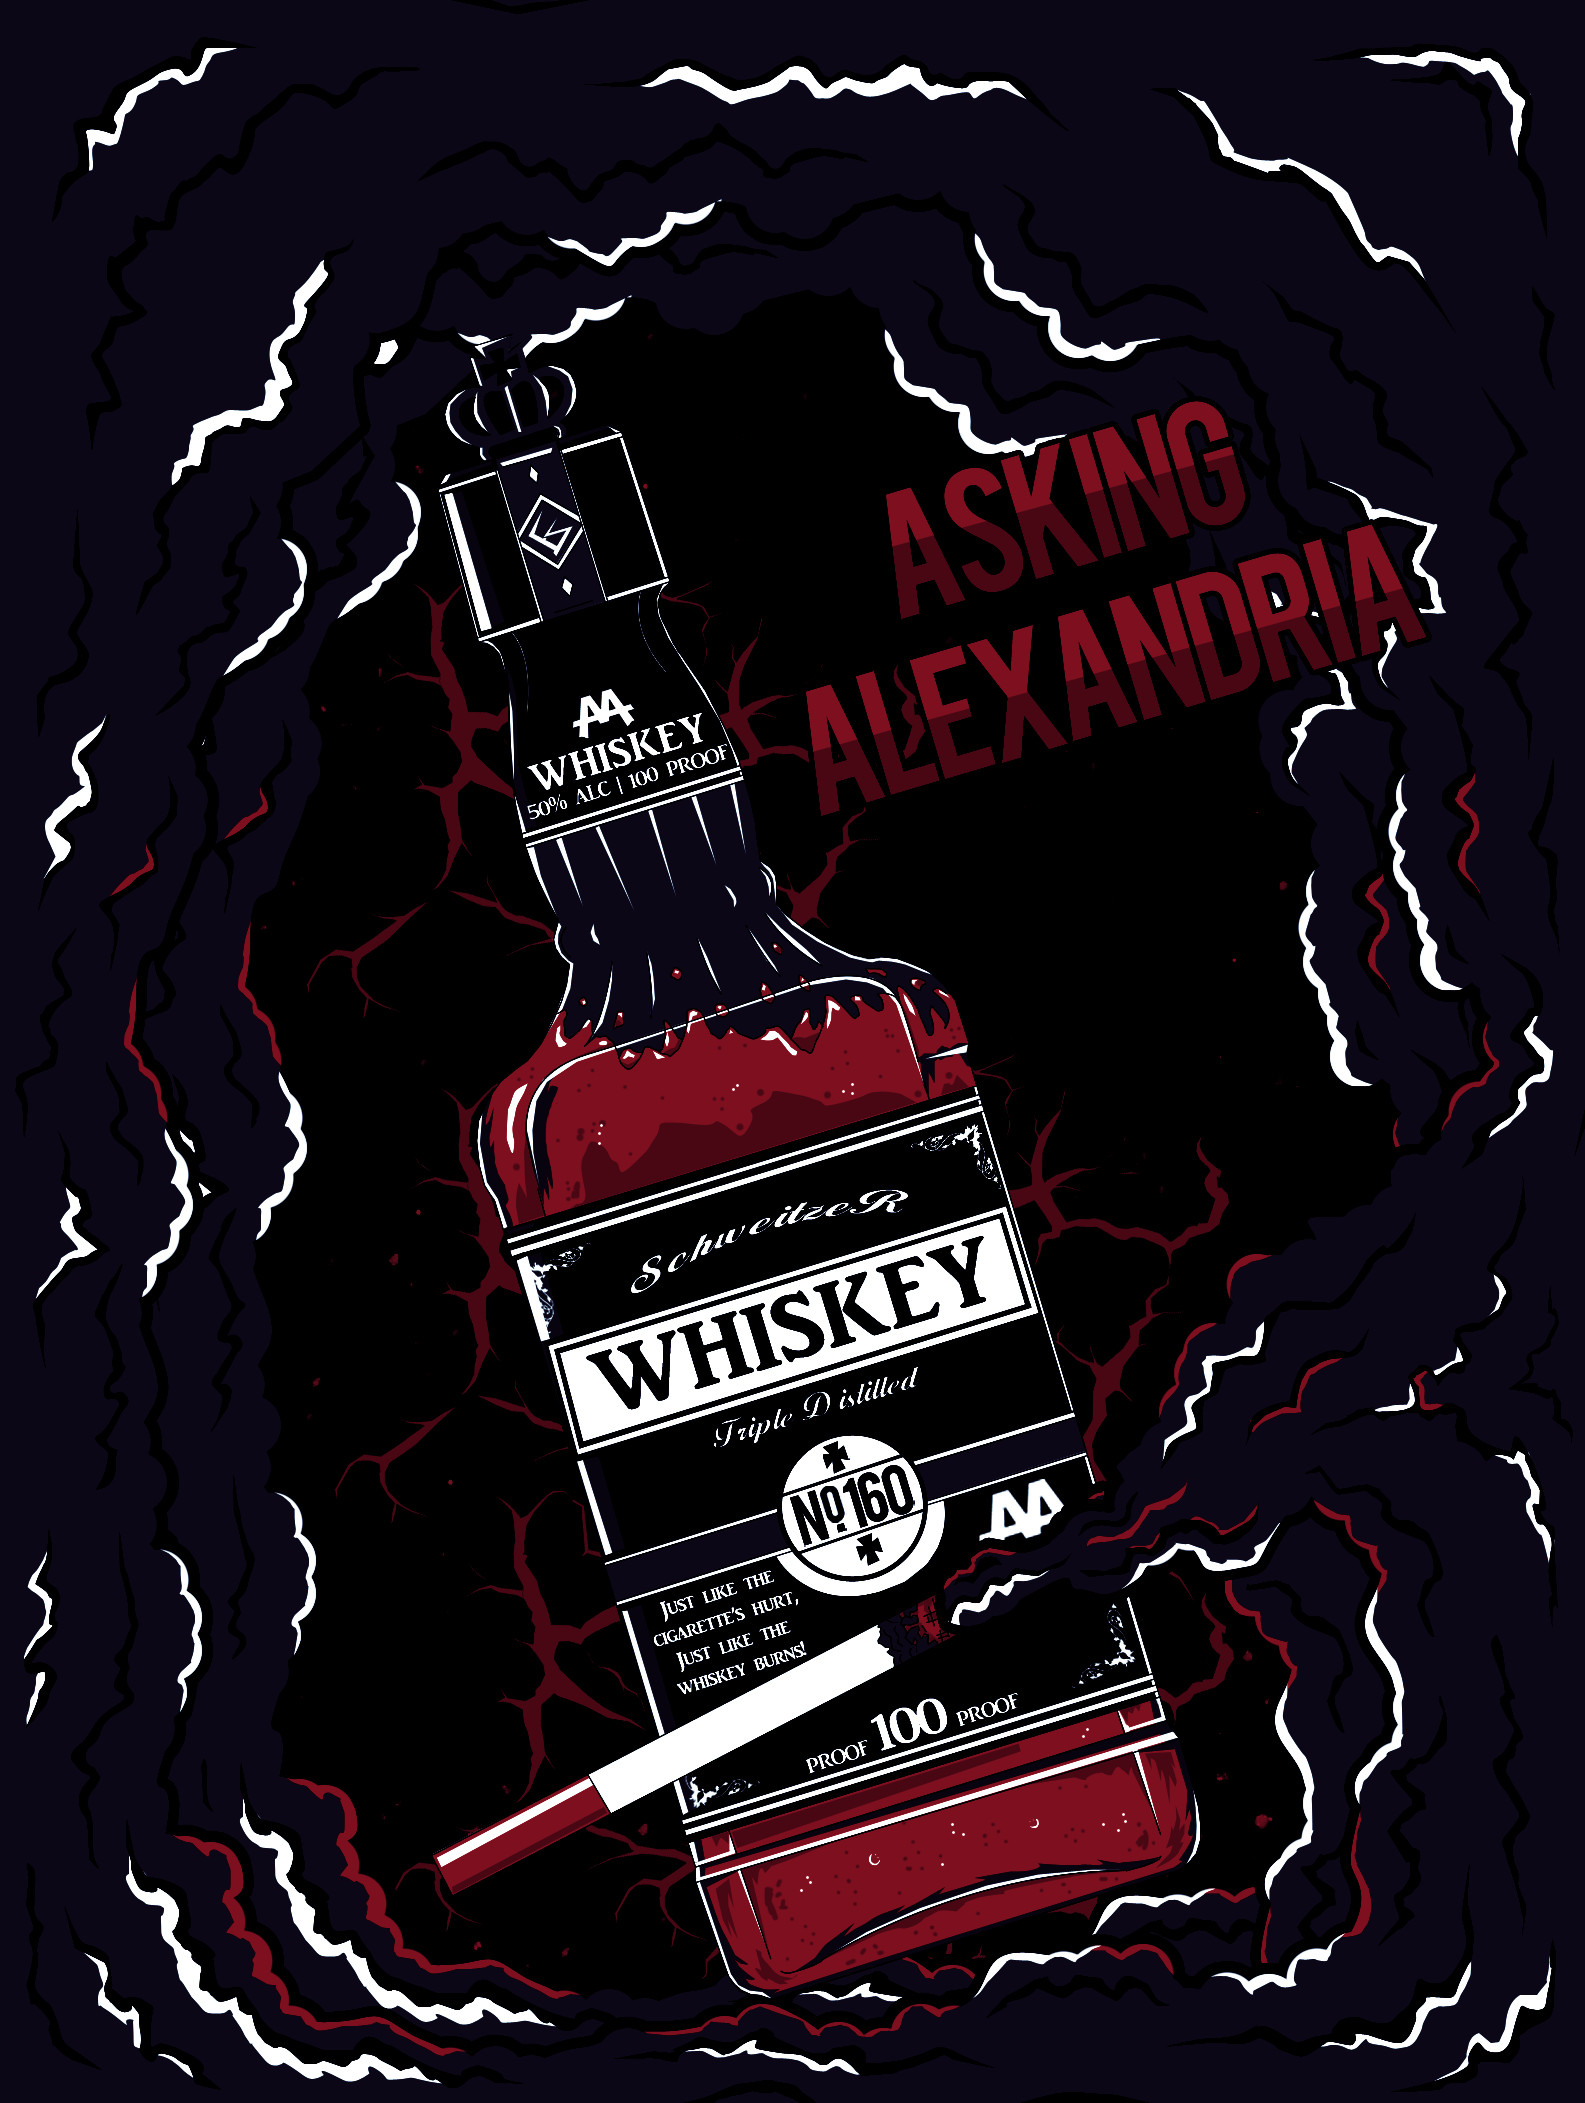 1585x2103 ... Asking Alexandria Reckless And Relentless Design by SykotiiK